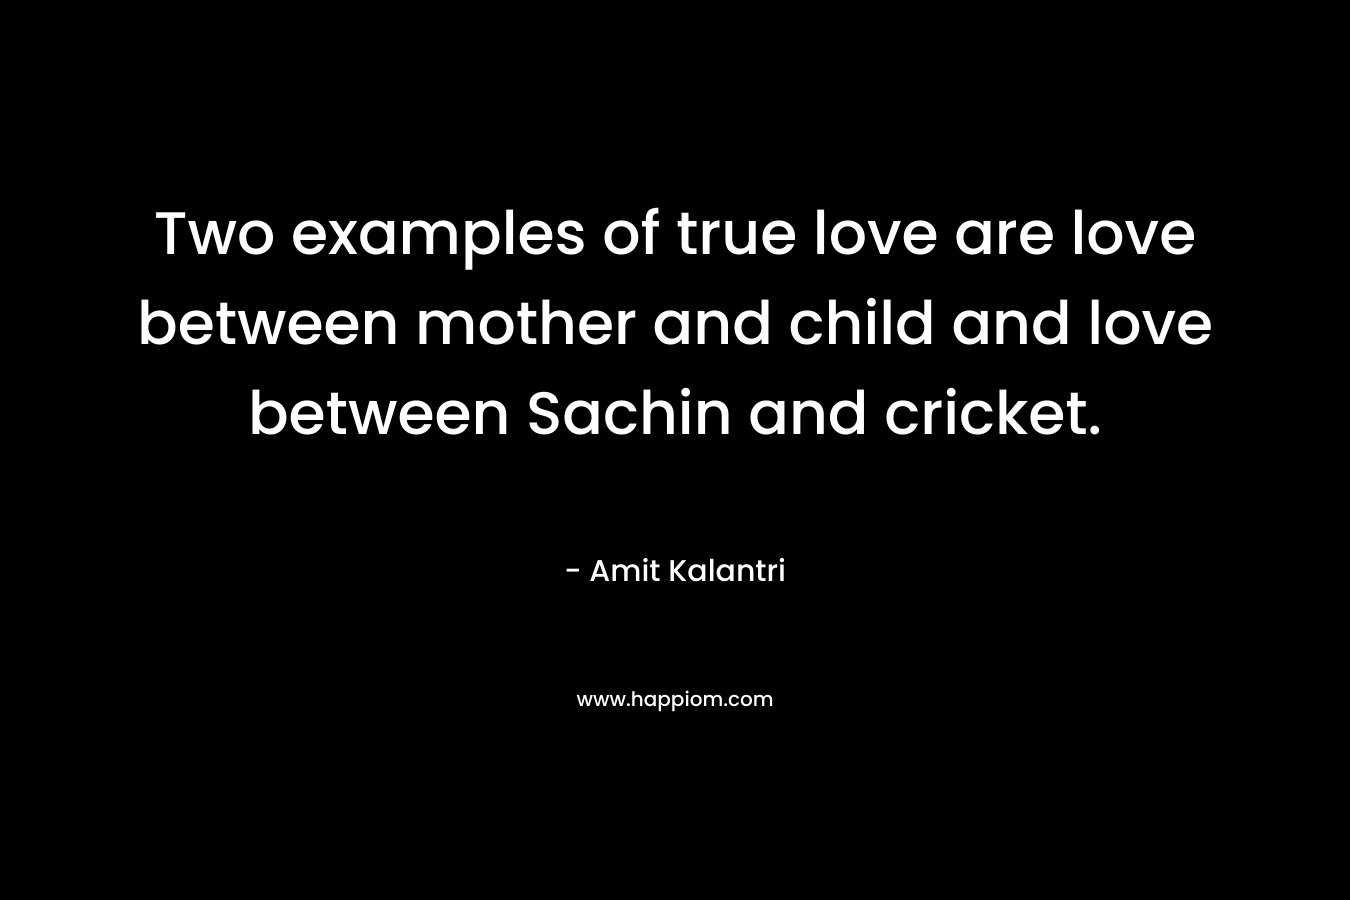 Two examples of true love are love between mother and child and love between Sachin and cricket.